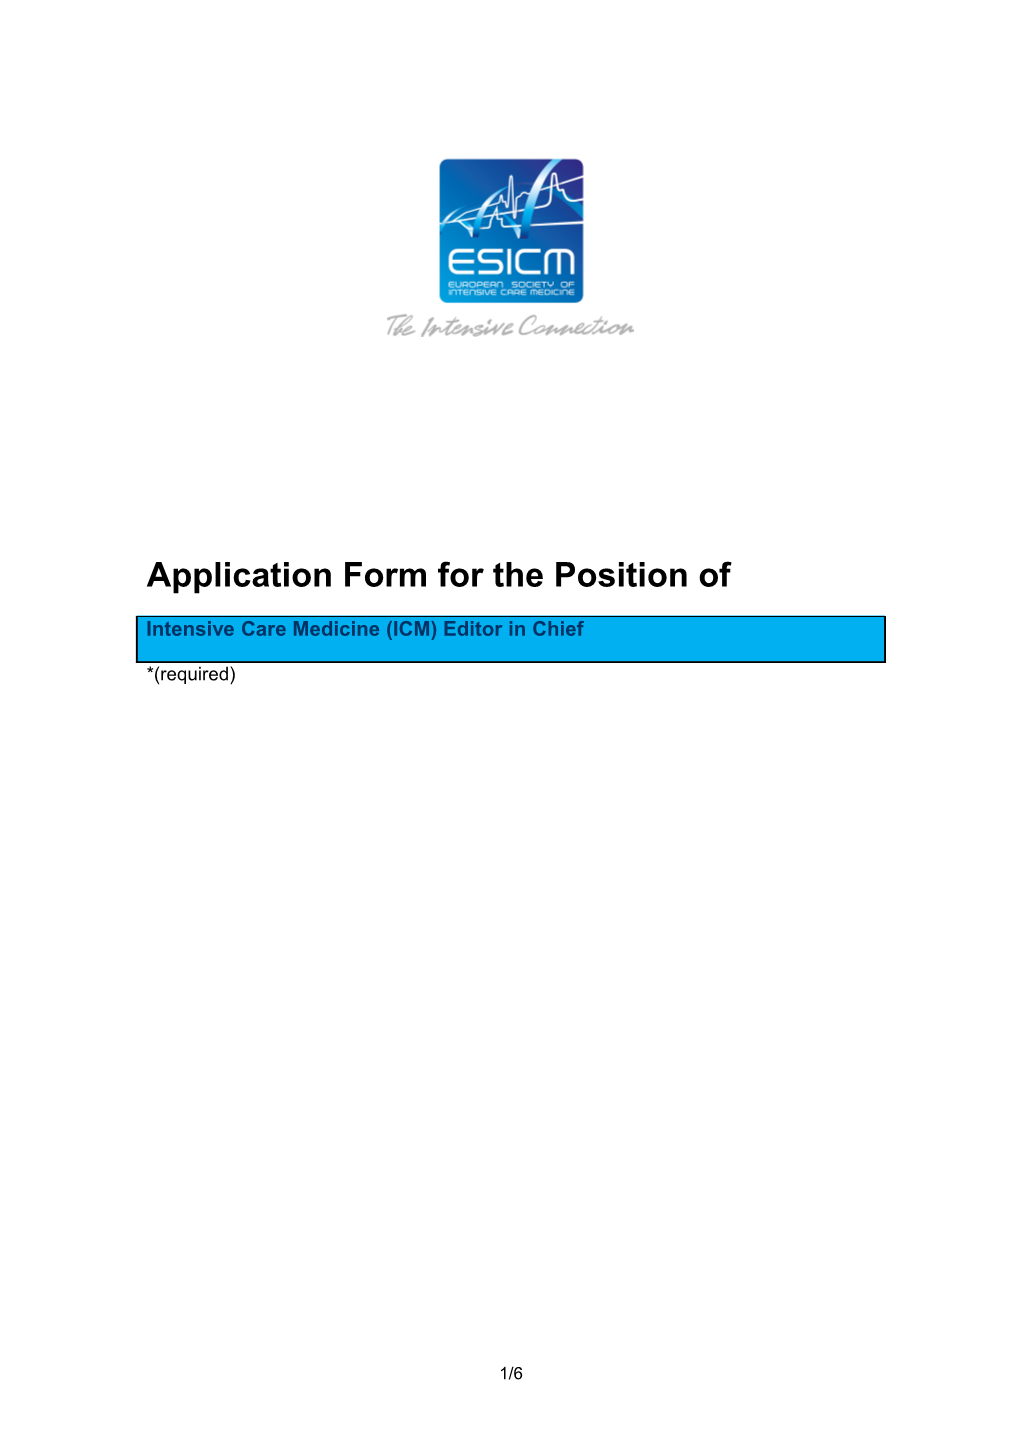 Application Form to the European Society of Intensive Care Medicine for the Position Of